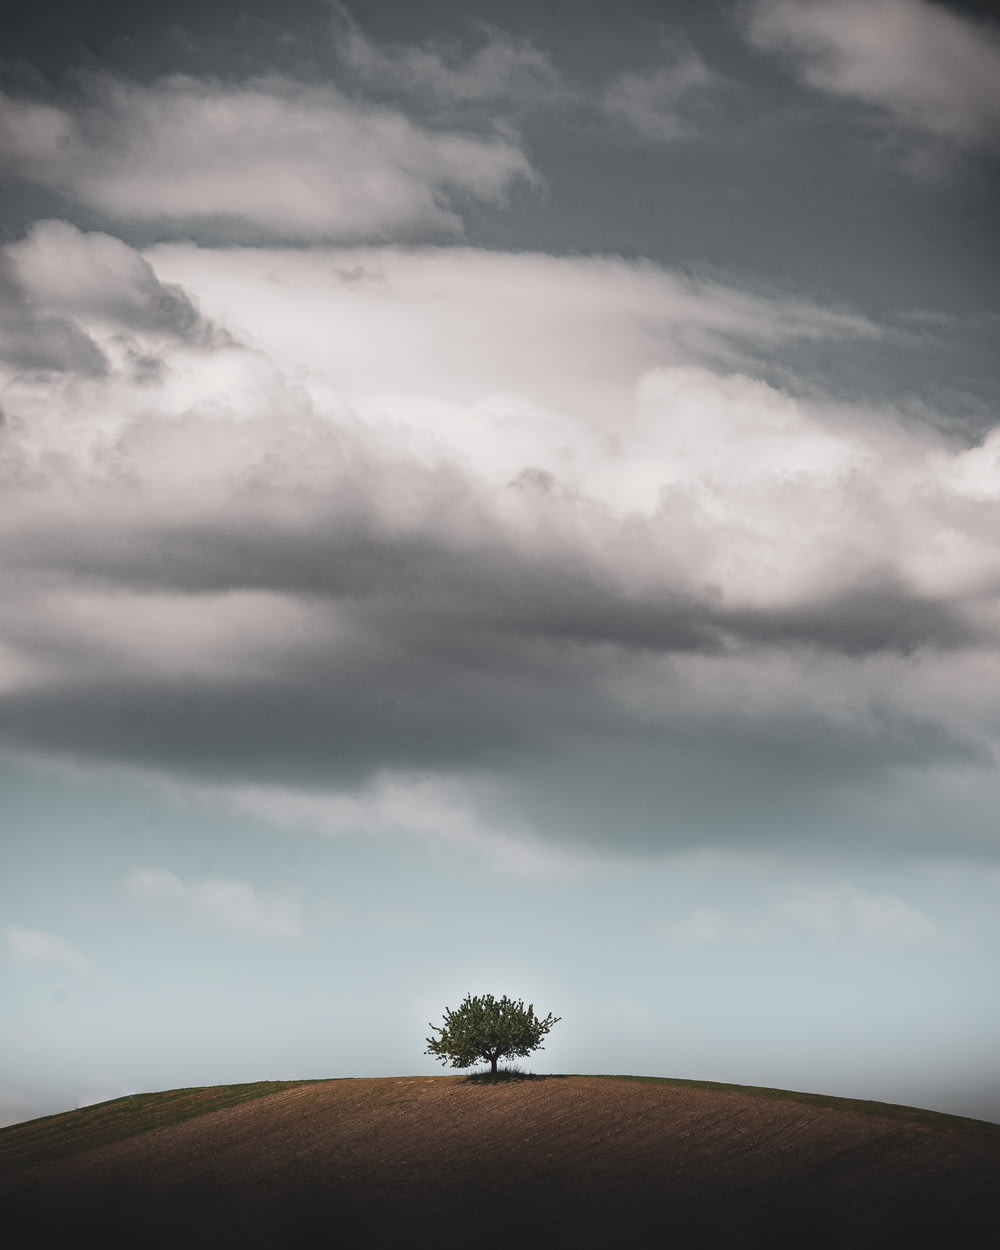 green tree under gray clouds